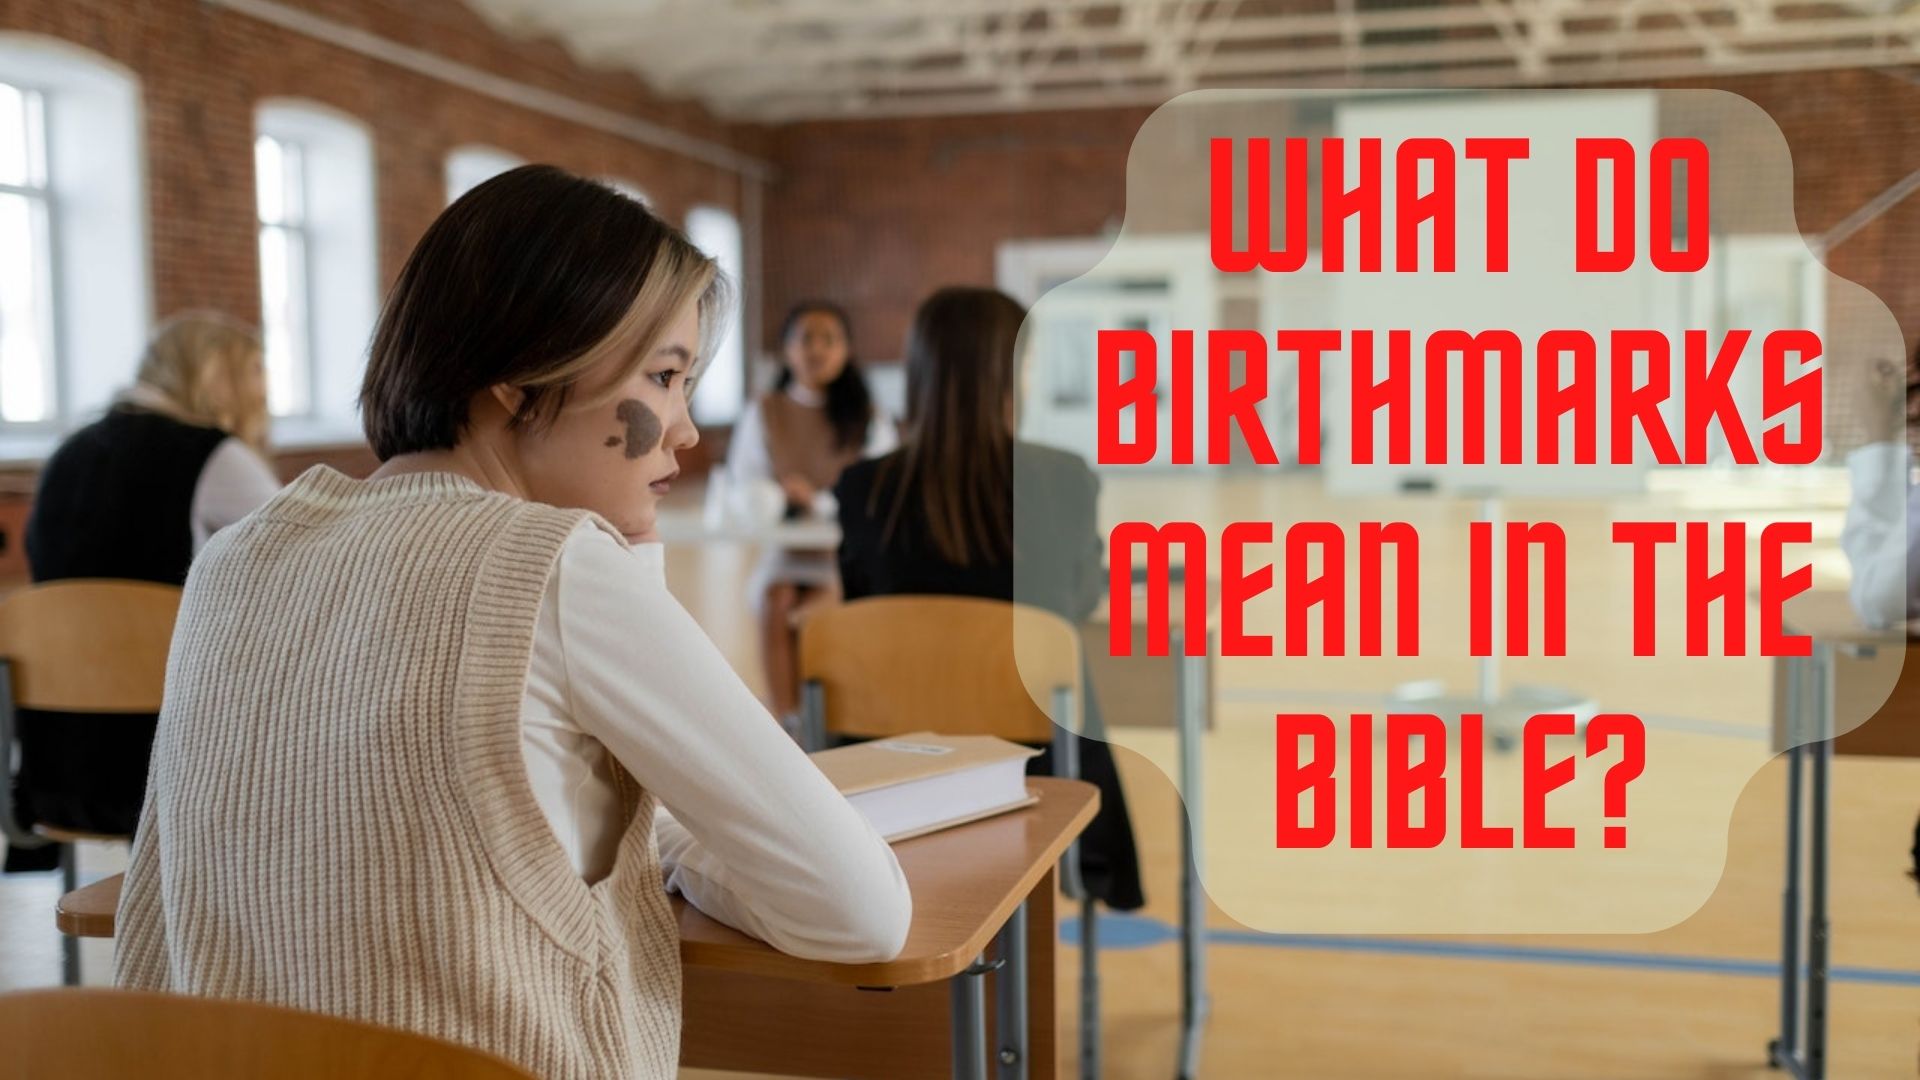 What Do Birthmarks Mean In The Bible?